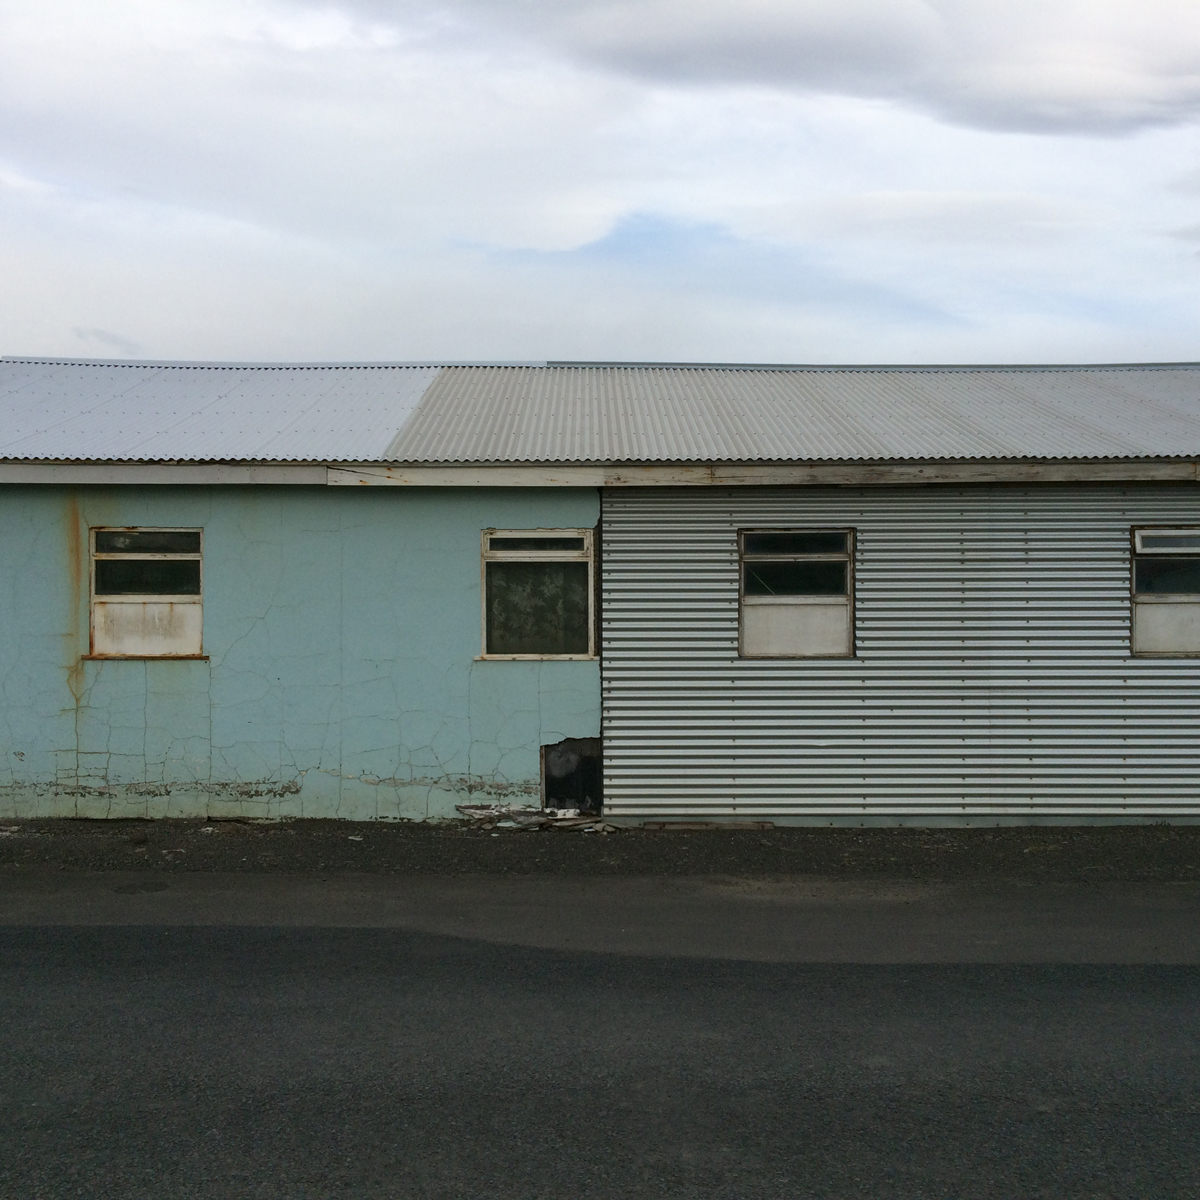 A light blue and grey corrugated metal-roofed building with four small windows.